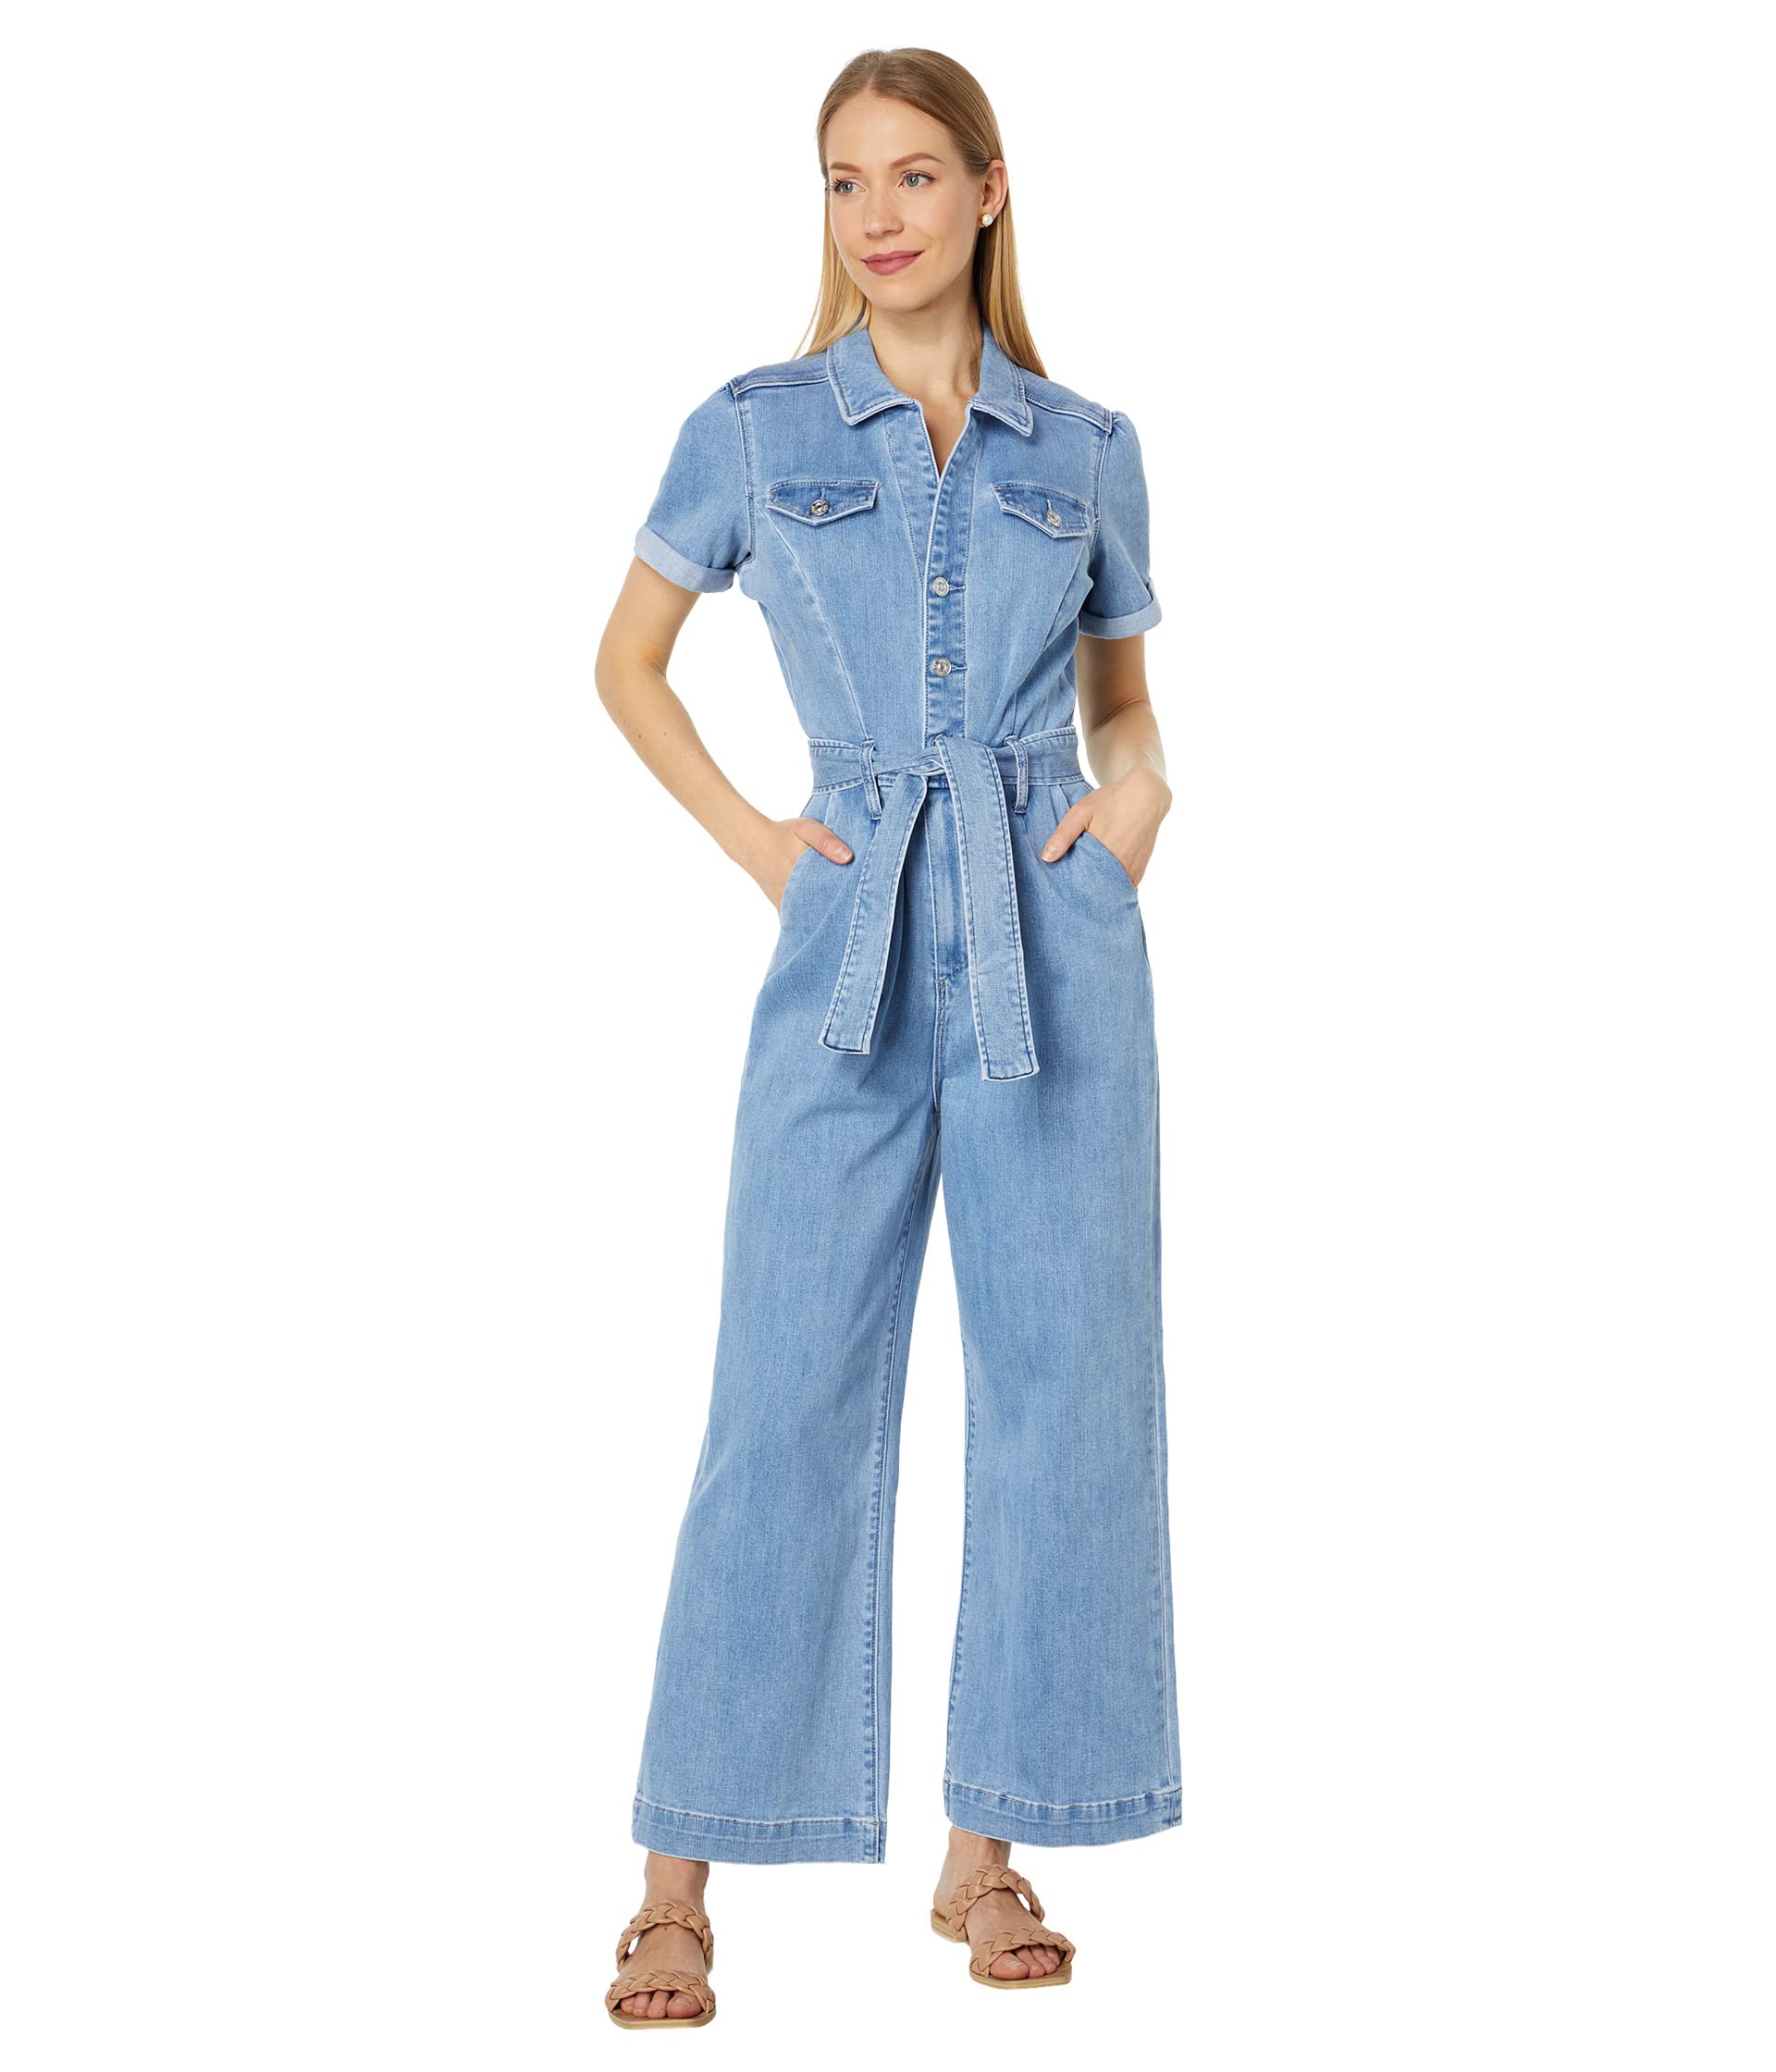 Anessa Short Sleeve Jumpsuit Self Belt in Hailey Paige